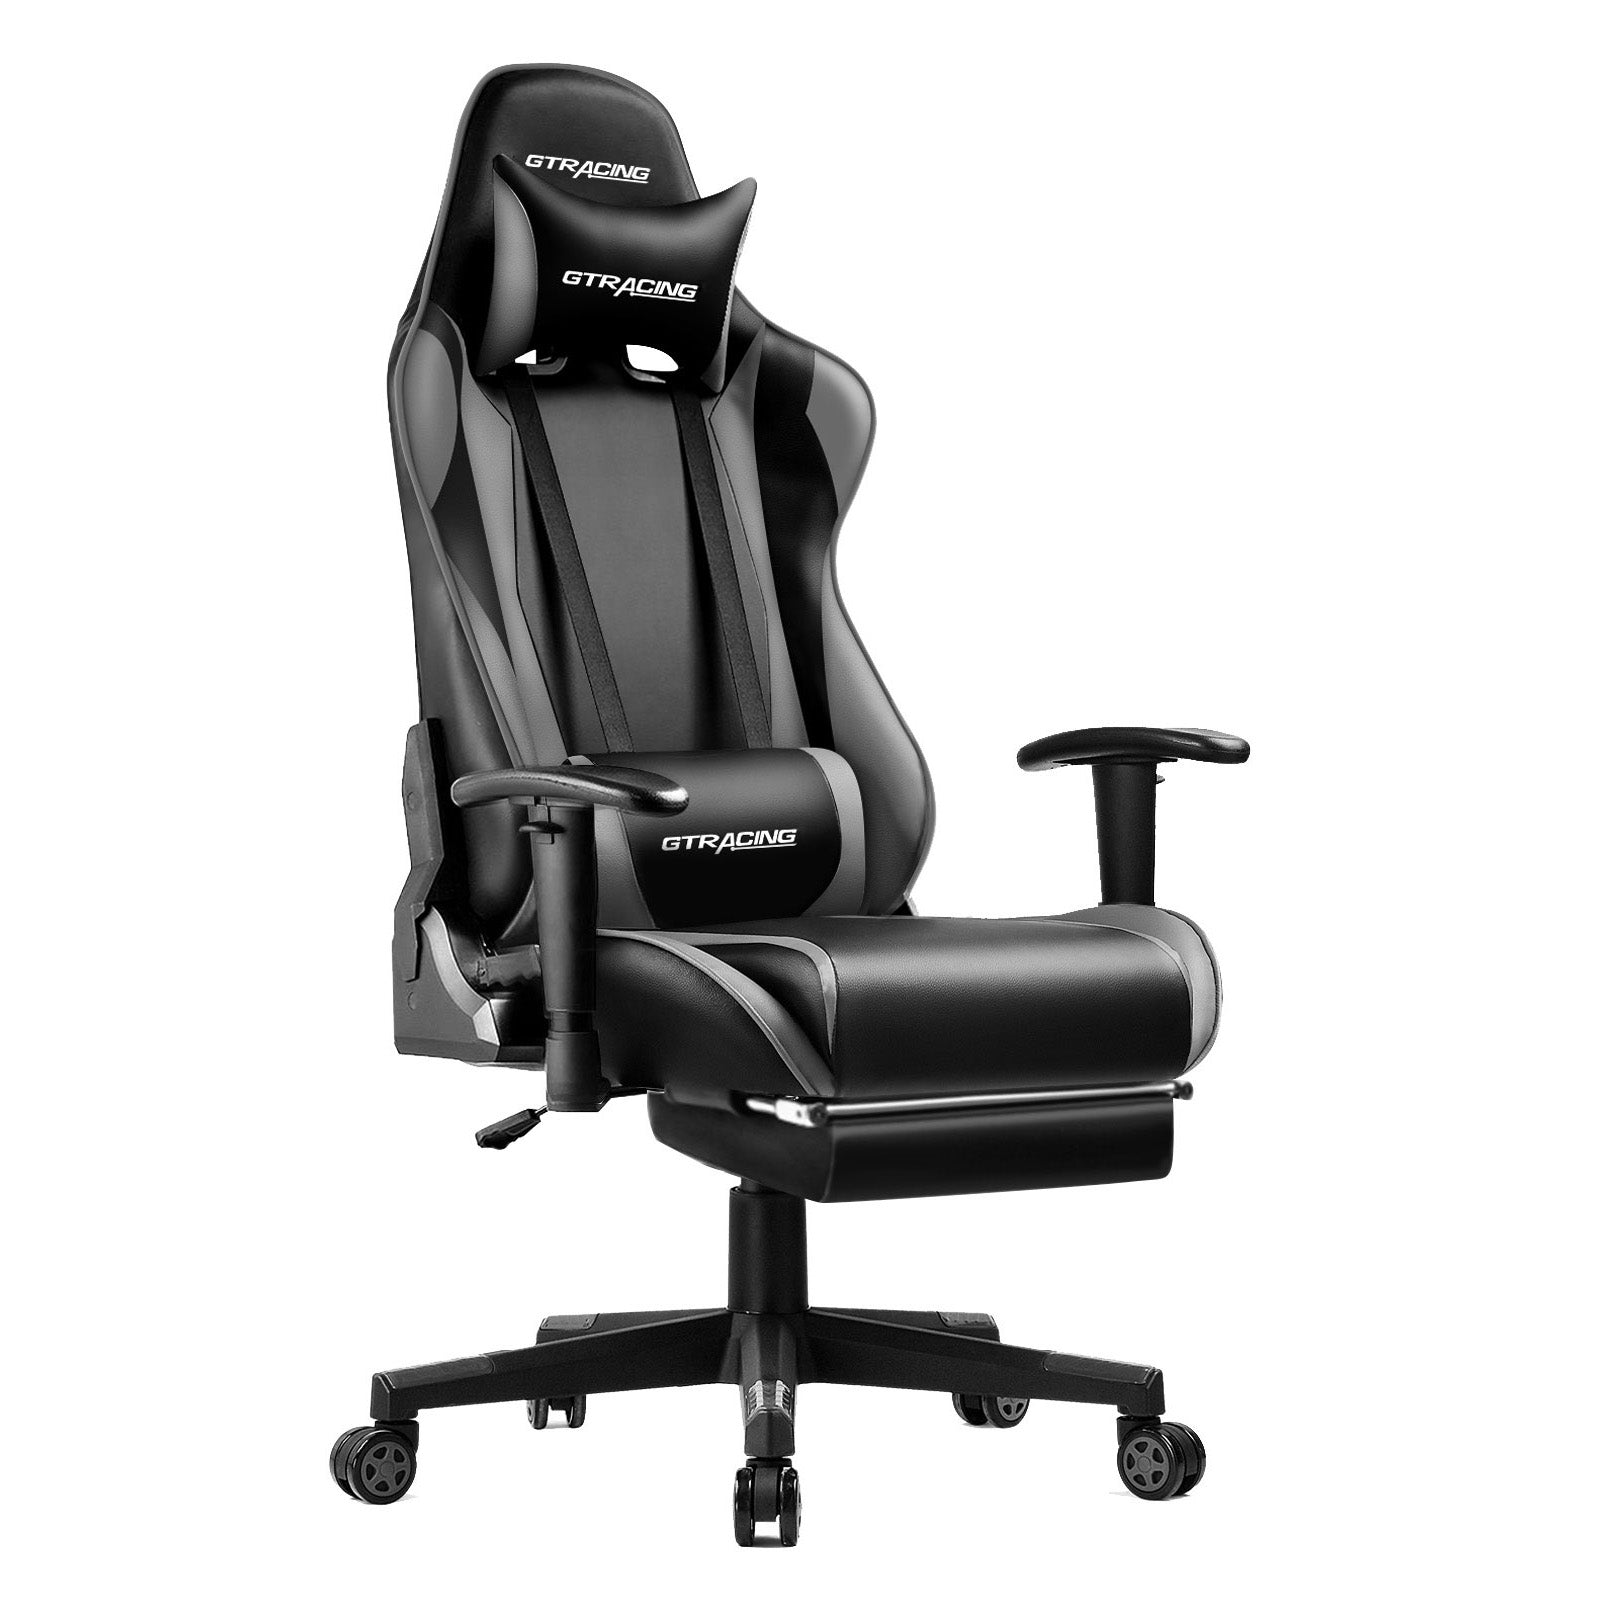 GT002F Reclining Gaming Chair | GTRACING – GTRACING（ジーティー